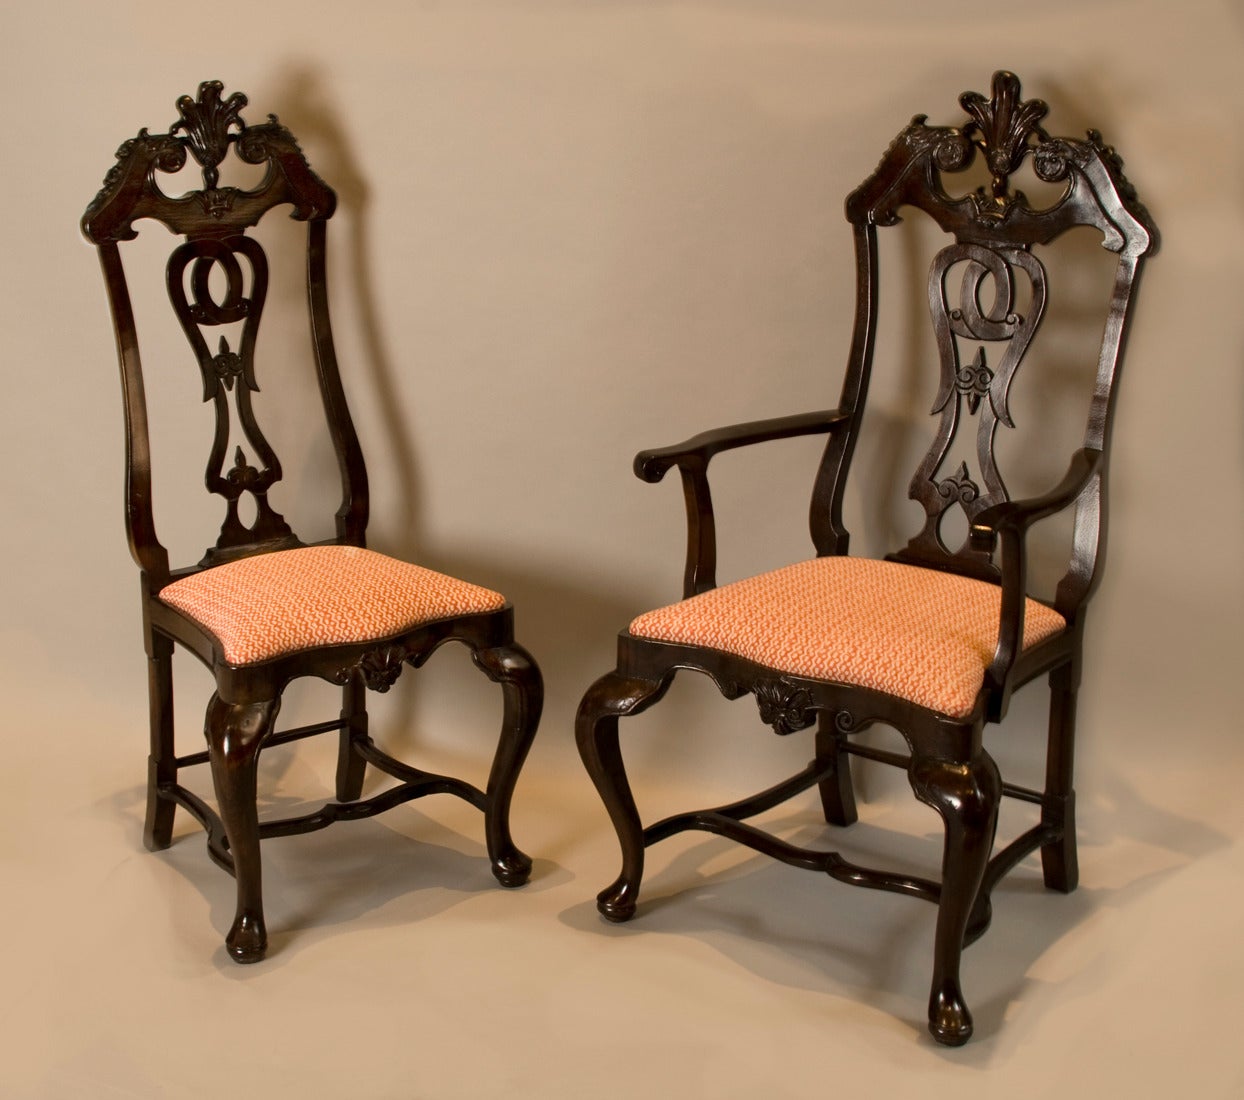 Hand-Carved Set of Six 18th C. Portuguese Rococo Dining Chairs, Jacaranda Wood, Fortuny F. For Sale